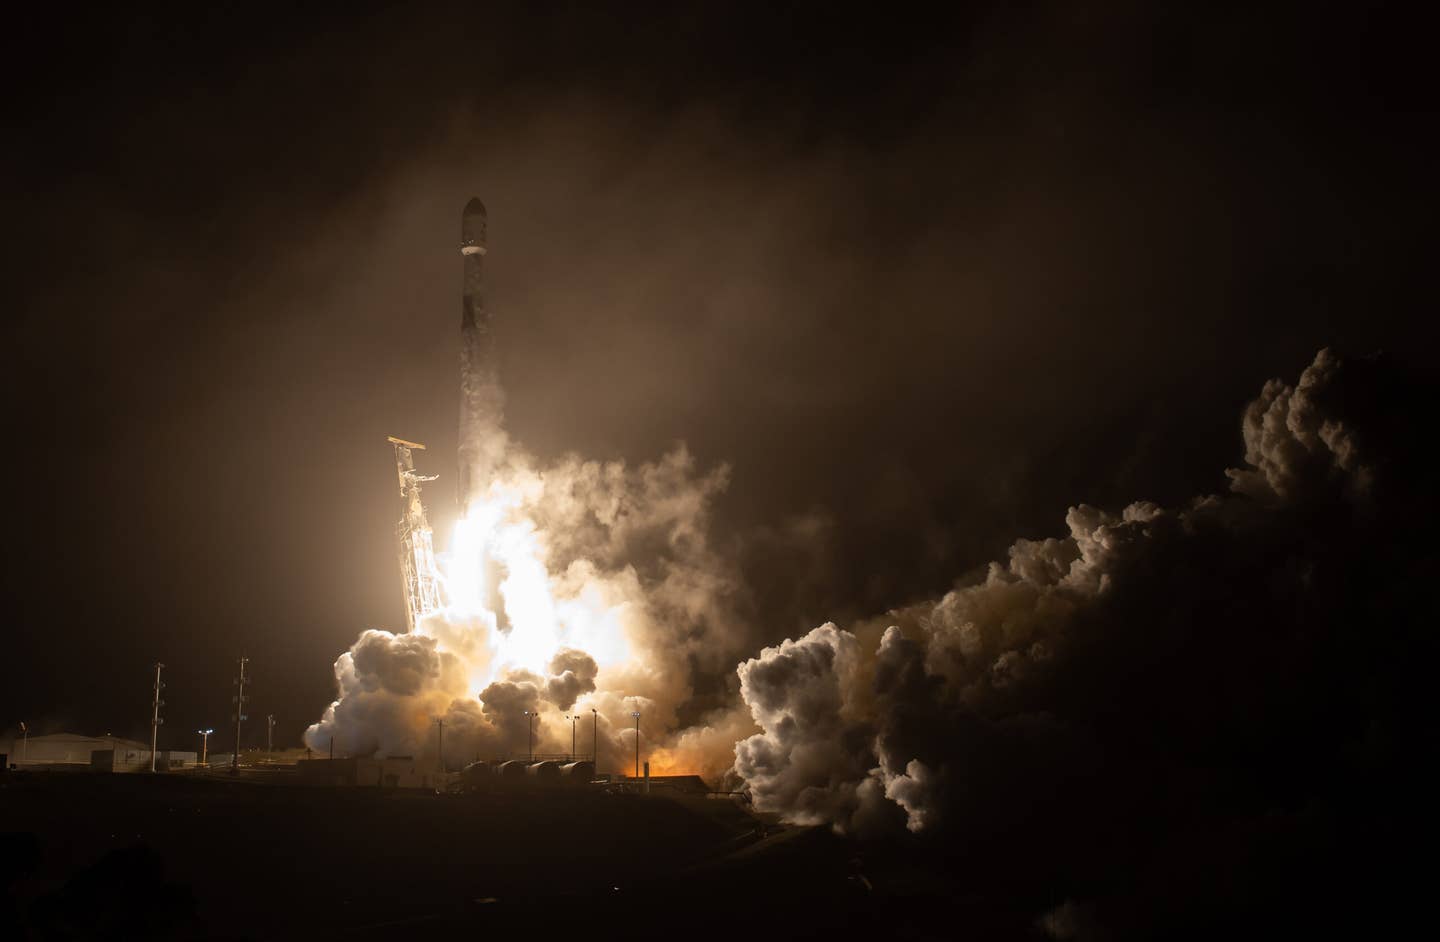 The SpaceX Falcon 9 rocket launches with the Double Asteroid Redirection Test, or DART, spacecraft onboard, Tuesday, Nov. 23, 2021, Pacific time (Nov. 24 Eastern time) from Space Launch Complex 4E at Vandenberg Space Force Base in California. DART is the world’s first full-scale planetary defense test, demonstrating one method of asteroid deflection technology. The mission was built and is managed by Johns Hopkins APL for NASA’s Planetary Defense Coordination Office. Photo Credit: (NASA/Bill Ingalls)